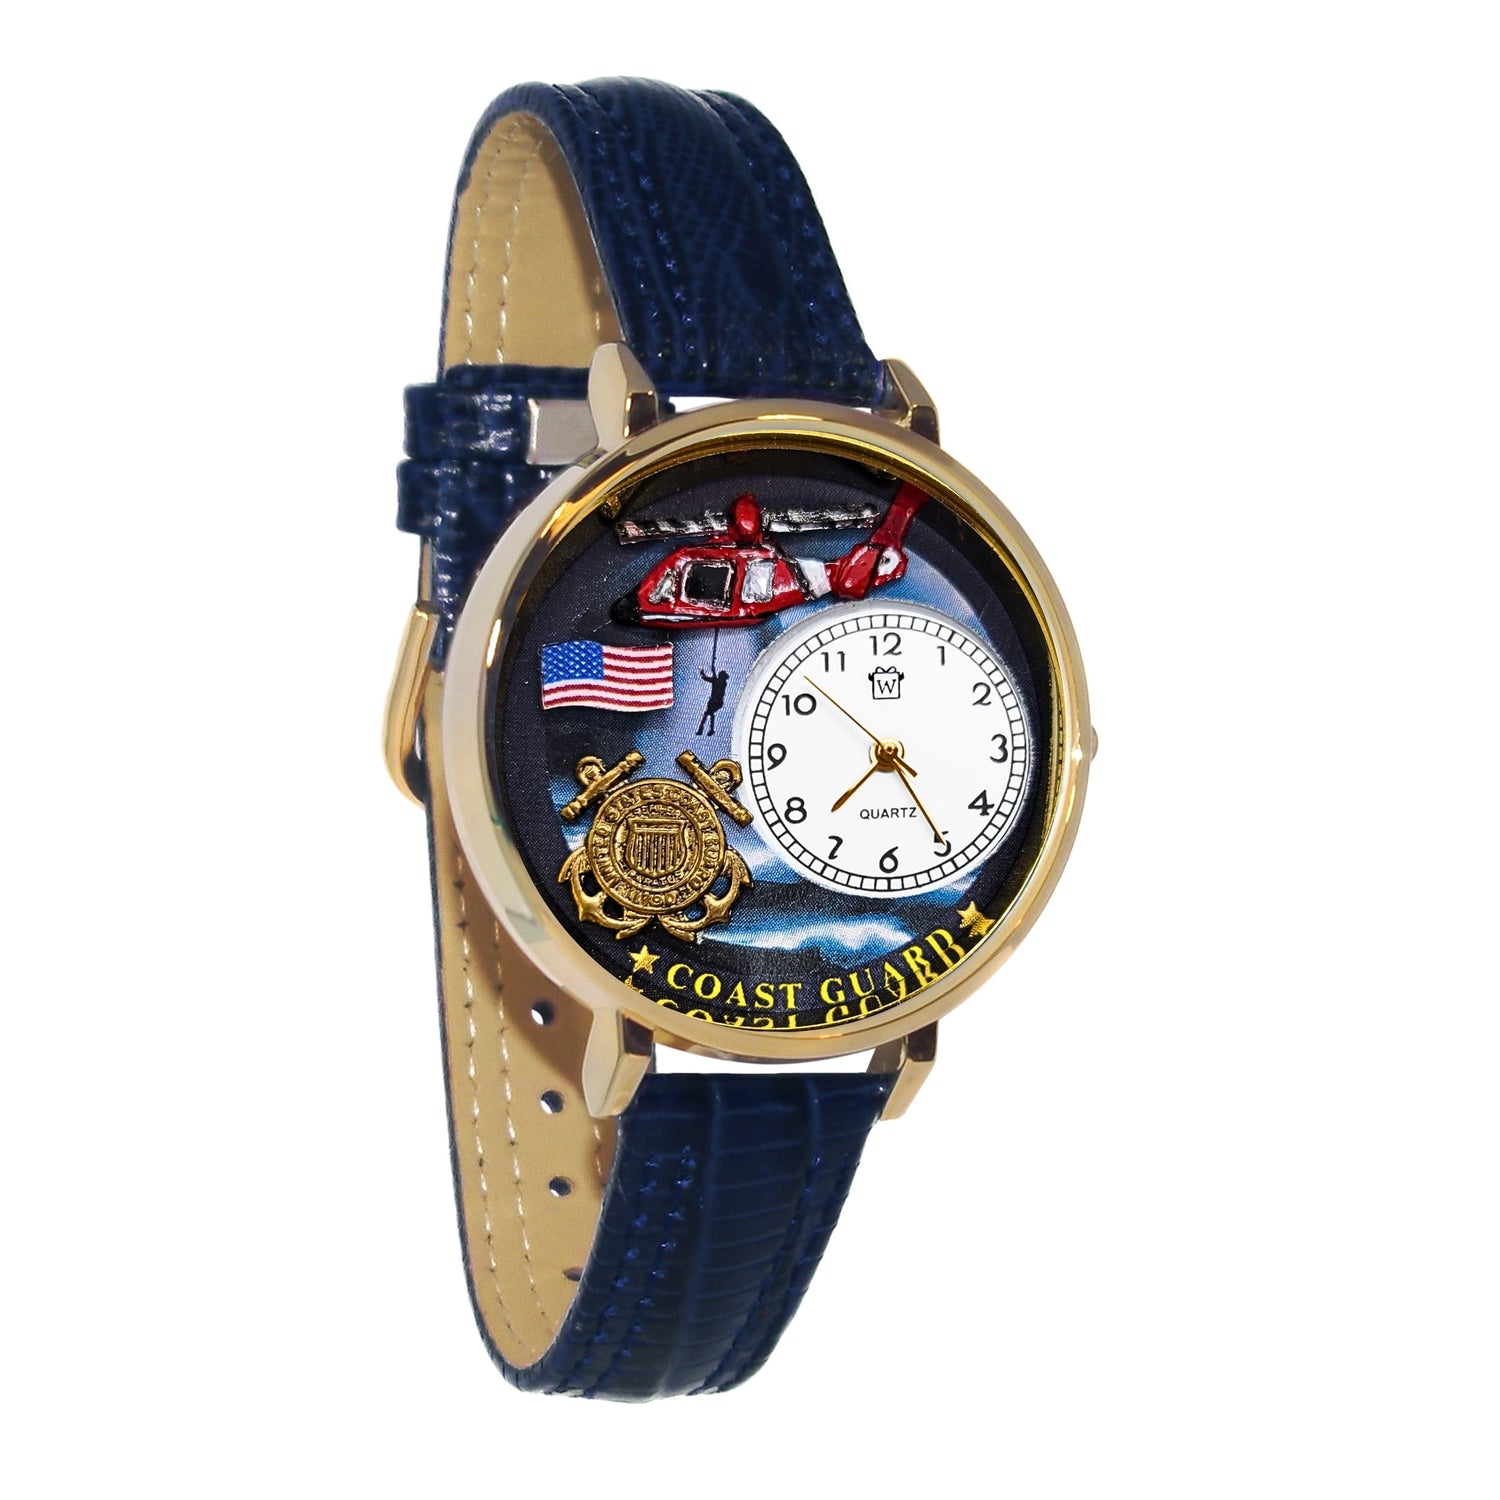 Whimsical Gifts | United States Coast Guard 3D Watch Large Style | Handmade in USA | Patriotic |  | Novelty Unique Fun Miniatures Gift | Gold Finish Navy Blue Leather Watch Band